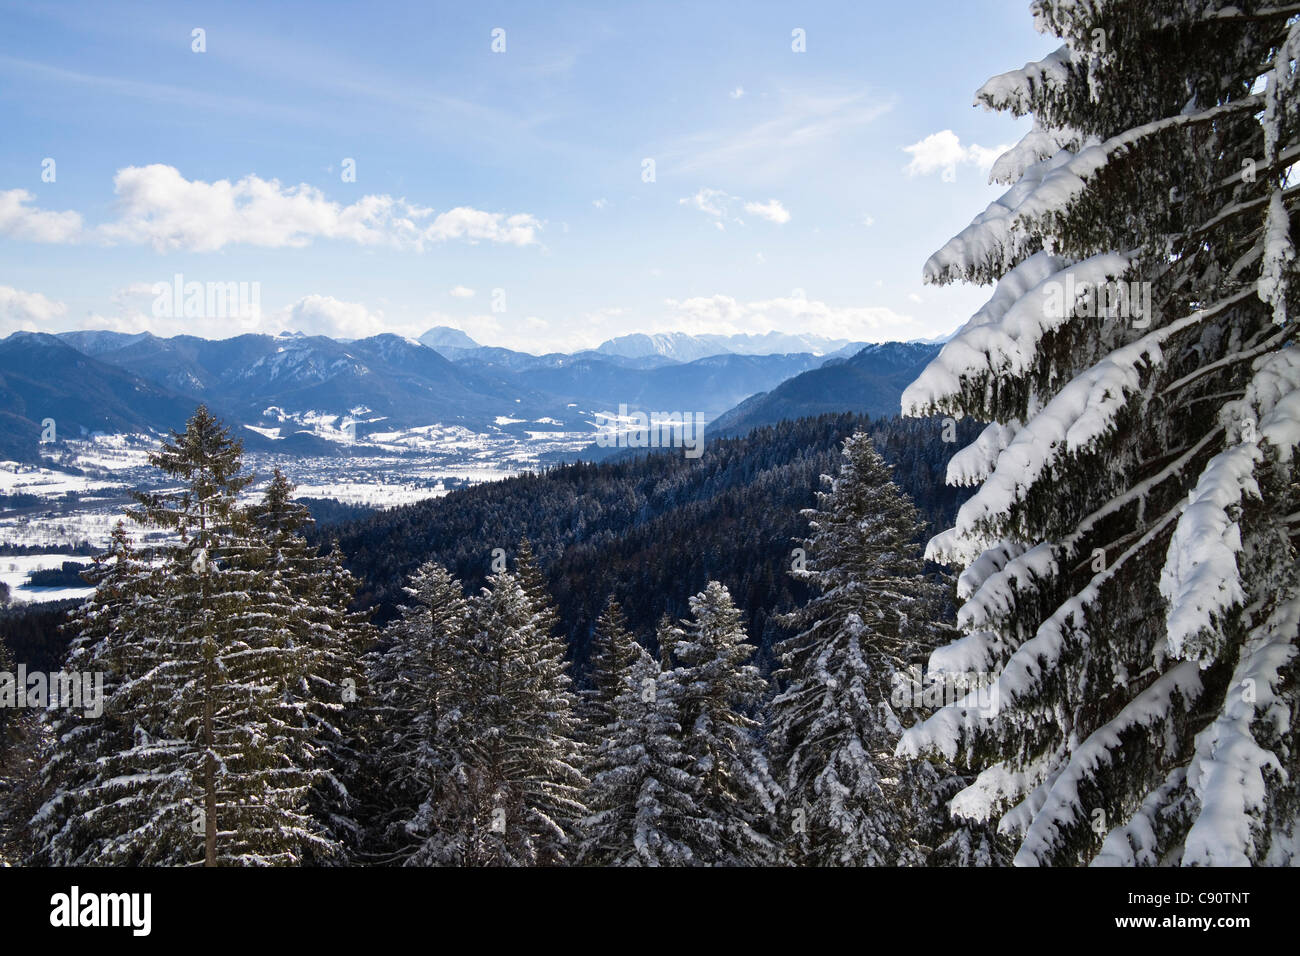 Winter scenery in the Bavarian Alps, view into the Isar Valley, Upper Bavaria, Germany, Europe Stock Photo